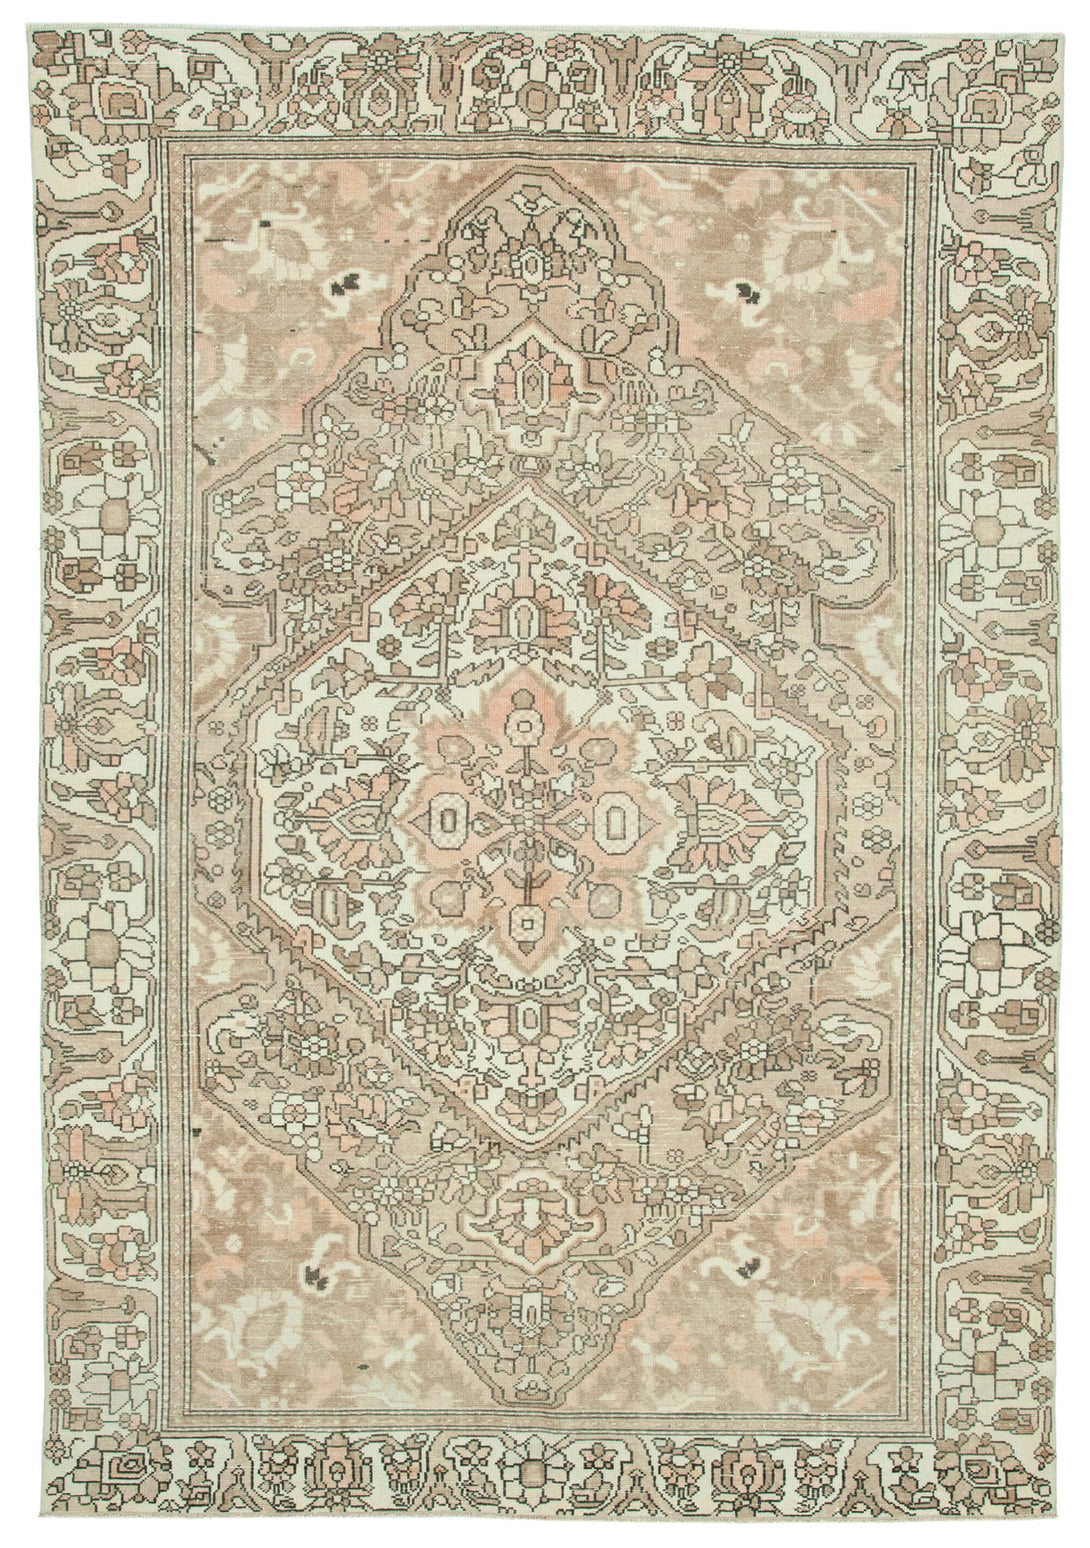 Handmade Persian Vintage Area Rug > Design# OL-AC-35097 > Size: 6'-4" x 9'-2", Carpet Culture Rugs, Handmade Rugs, NYC Rugs, New Rugs, Shop Rugs, Rug Store, Outlet Rugs, SoHo Rugs, Rugs in USA